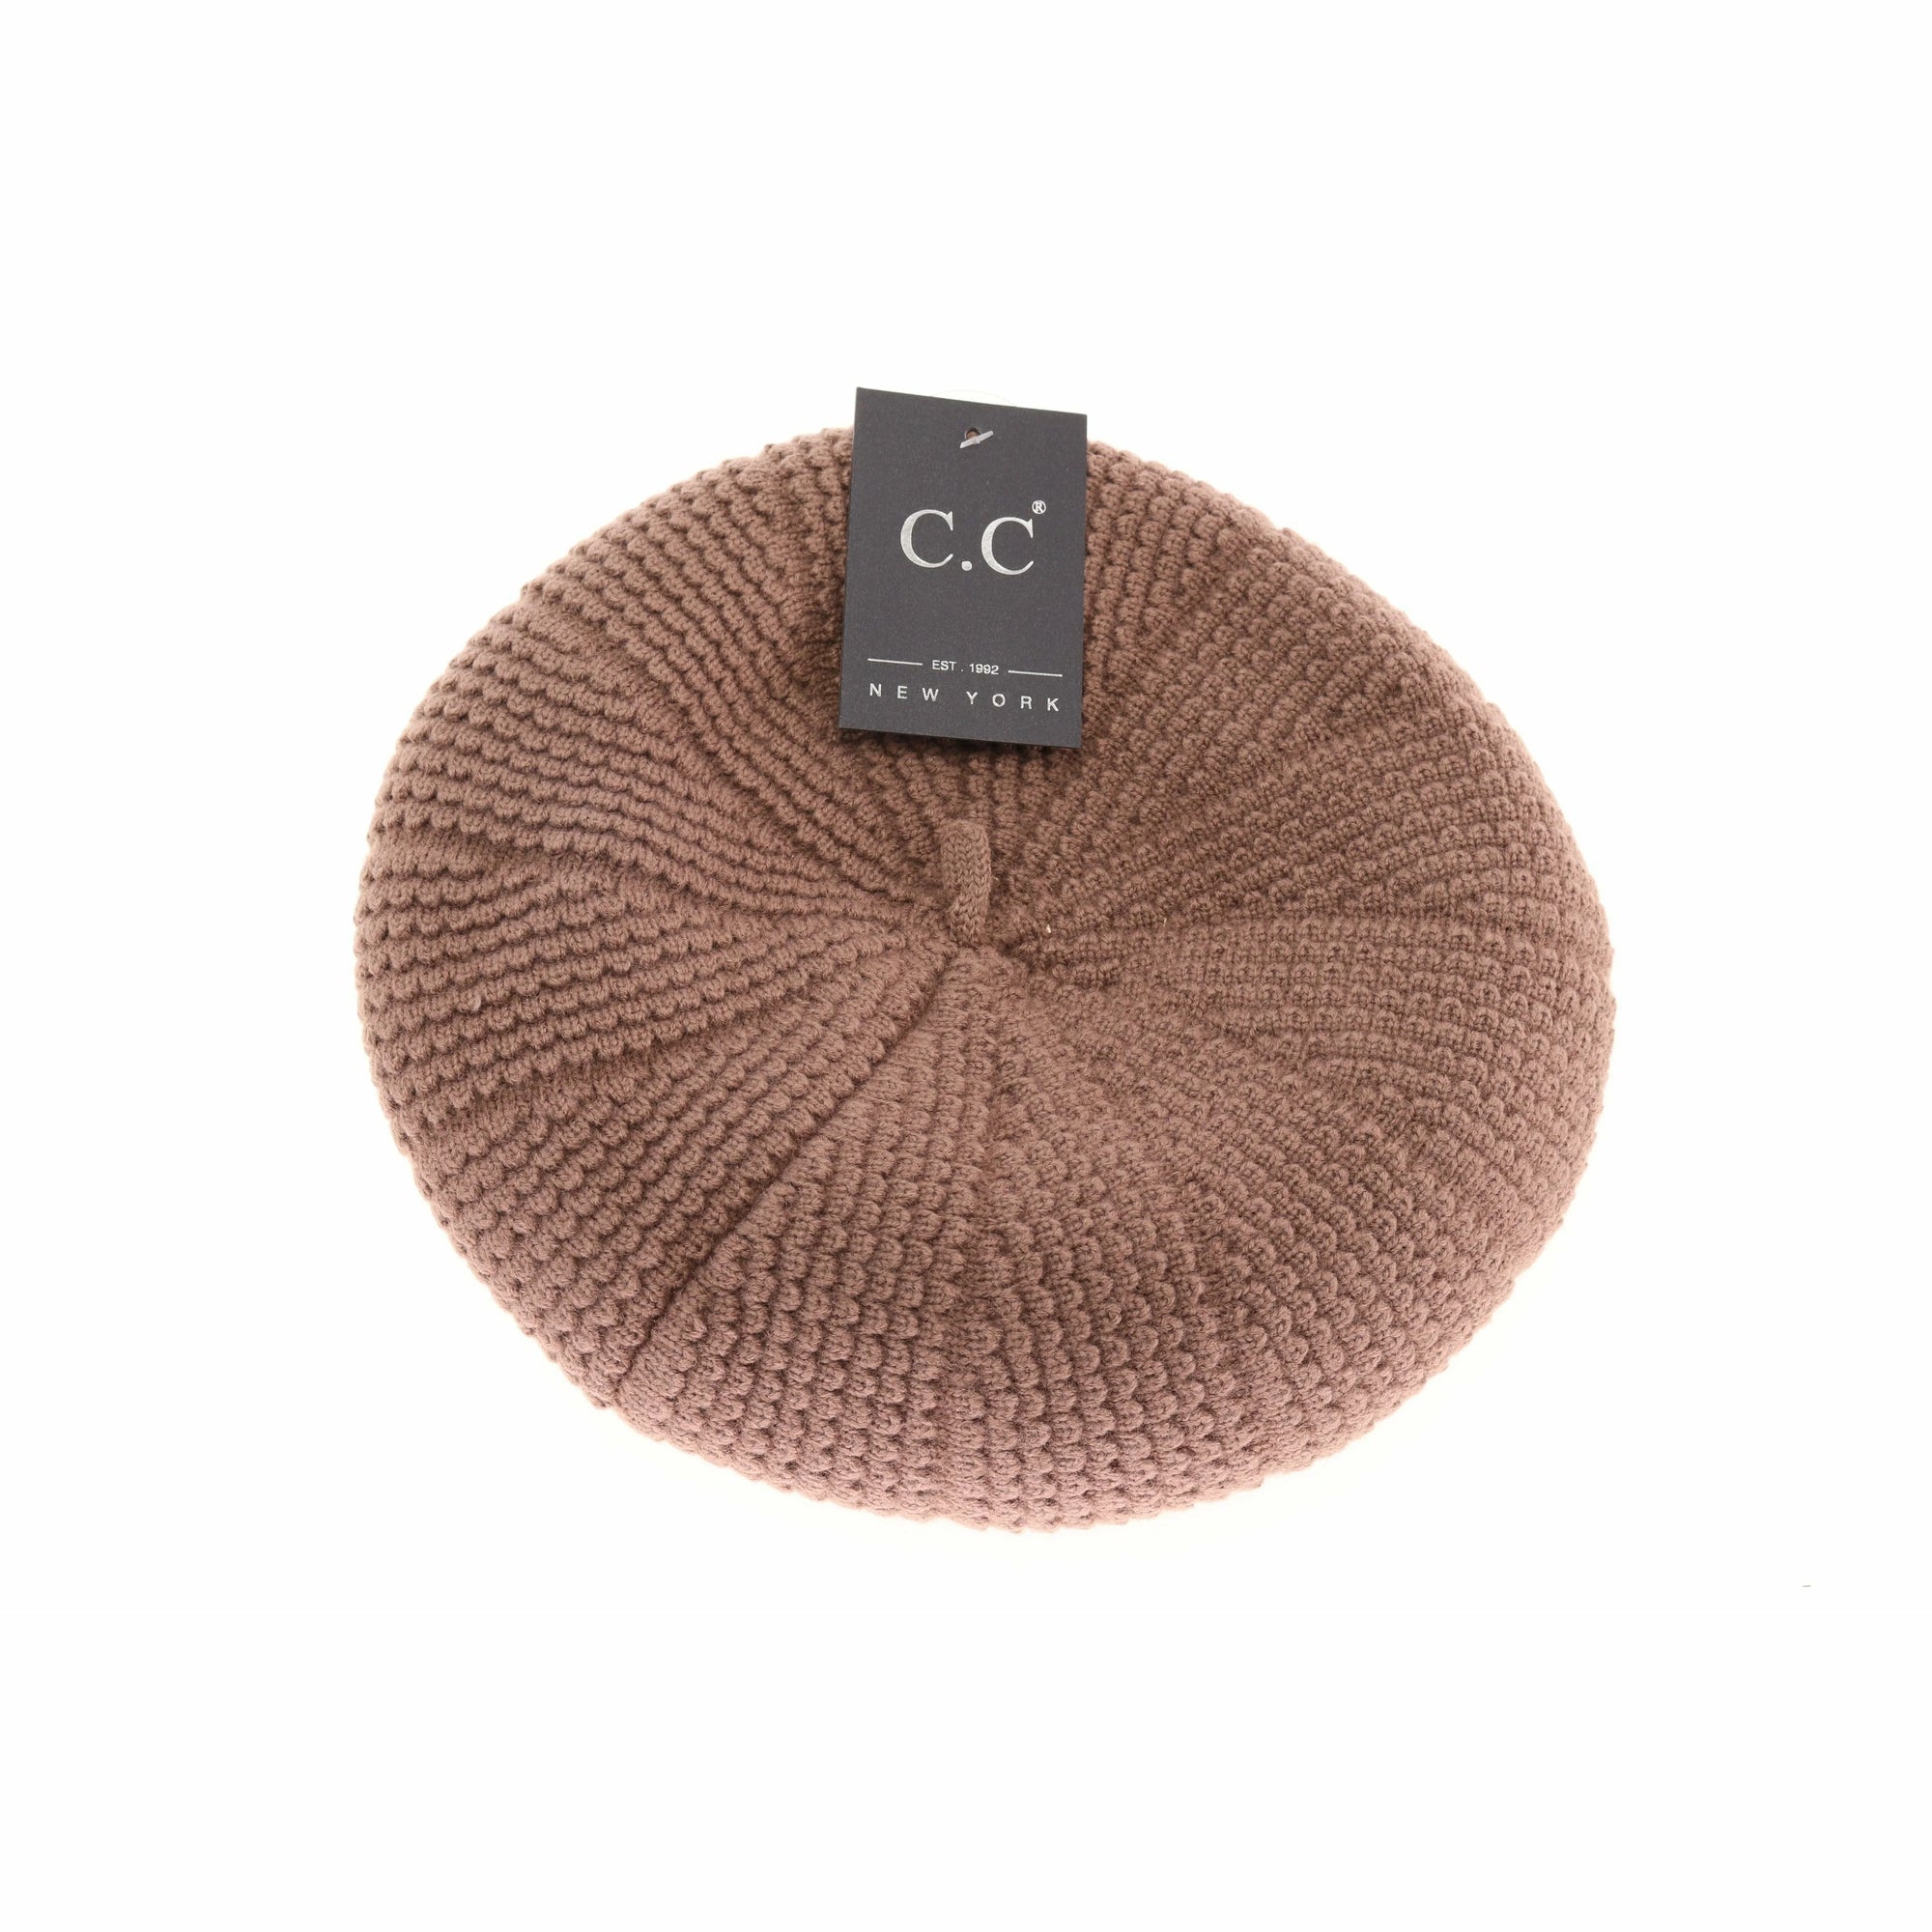 Scalloped Beret in Taupe